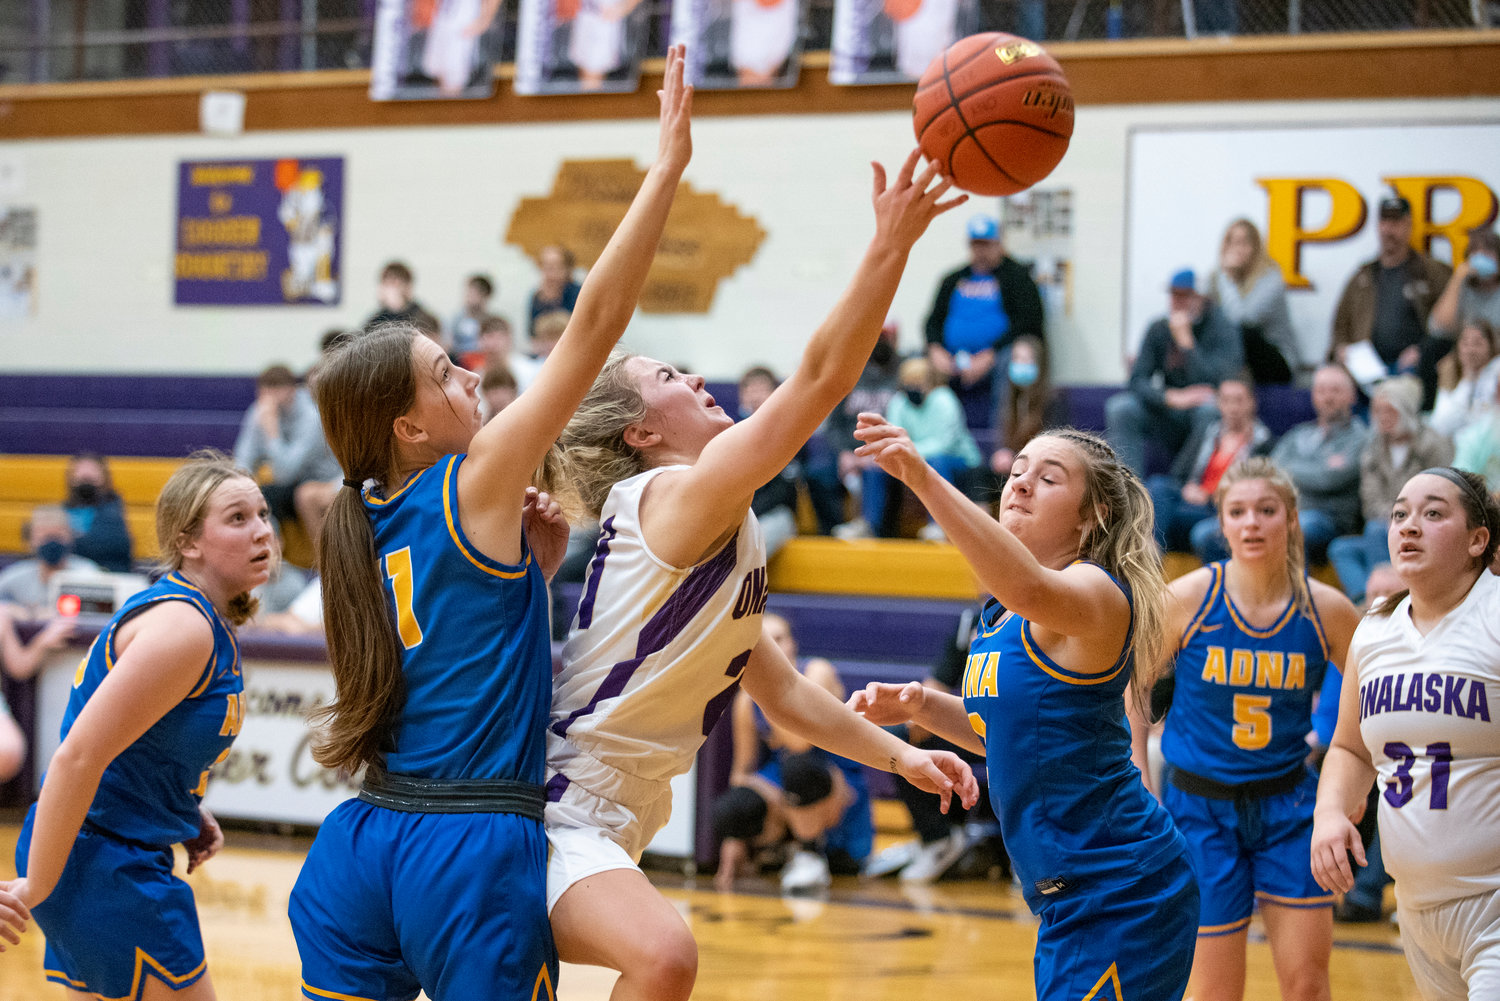 Onalaska's Callie Lawrence (21) drives for a layup attempt against Adna on Jan. 11.